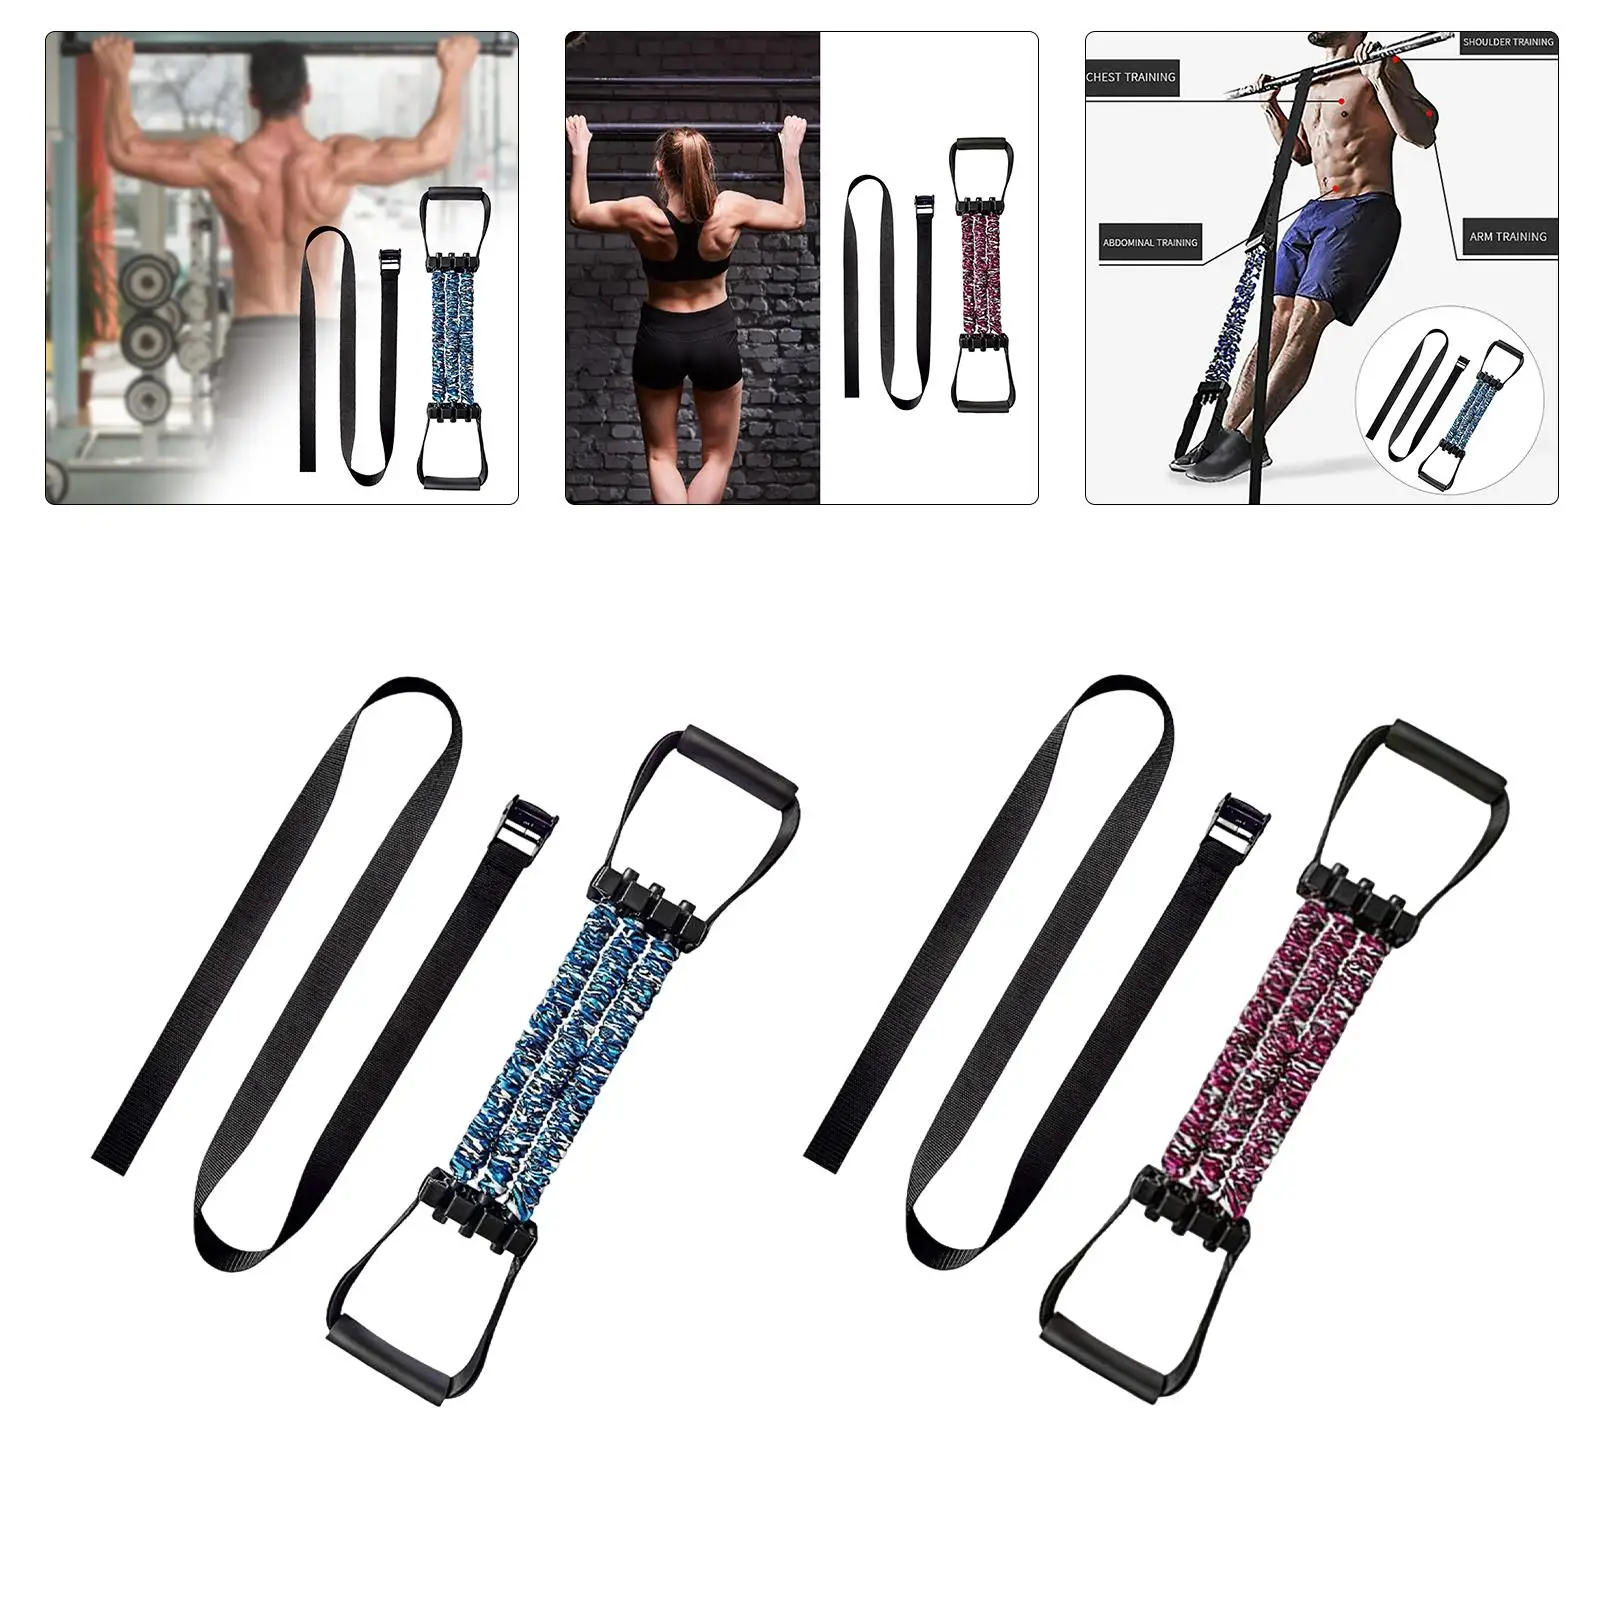 Chin up Assist Band System Chest Expander Premium for Powerlifting Exercise Training Equipment